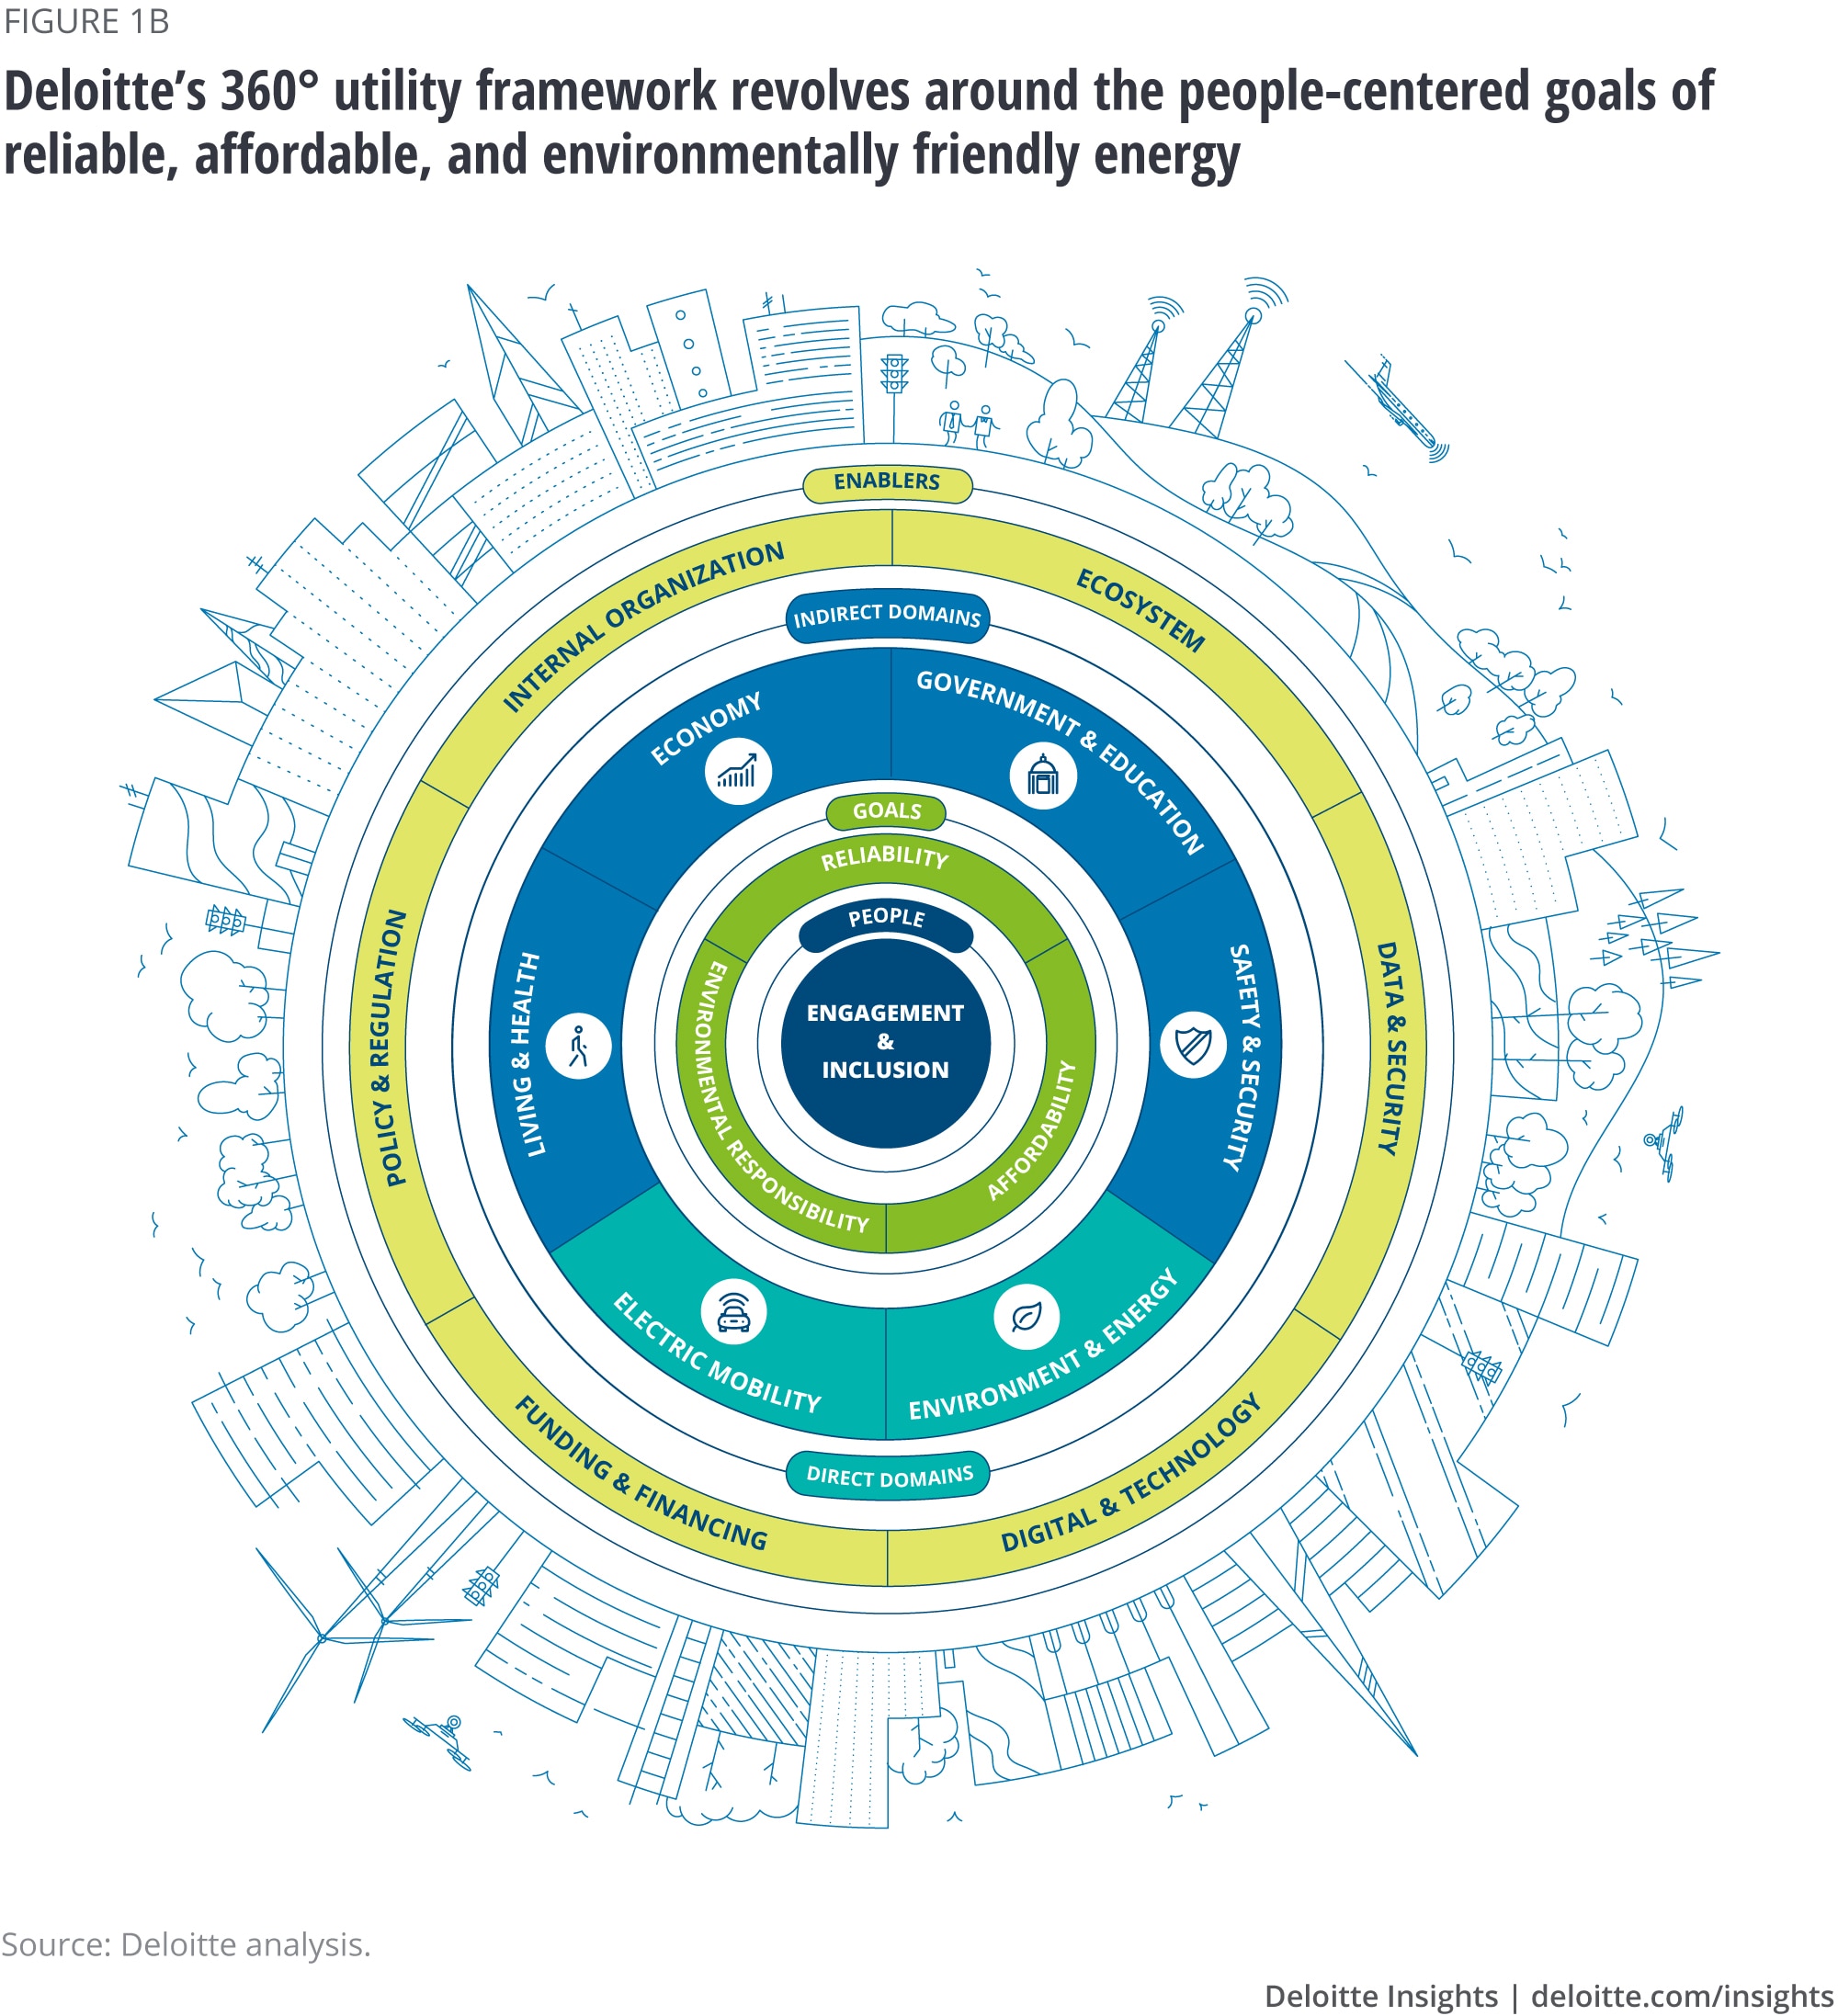 Deloitte’s 360° utility framework revolves around the people-centered goals of reliable, affordable, and environmentally friendly energy